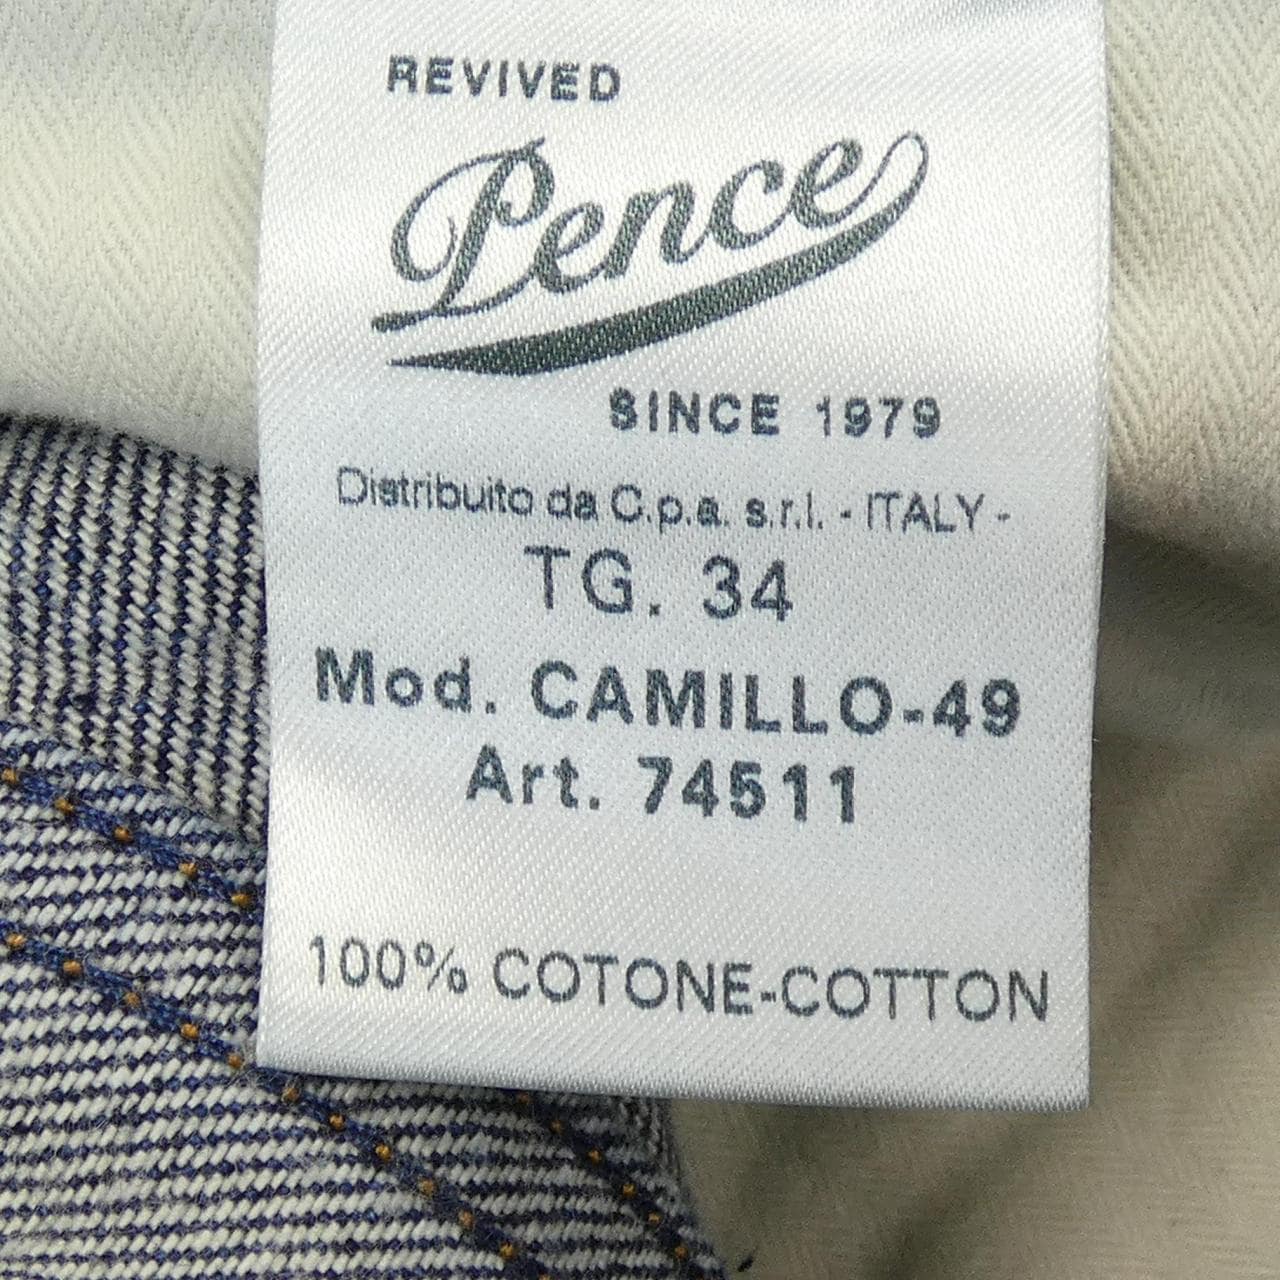 PENCE jeans